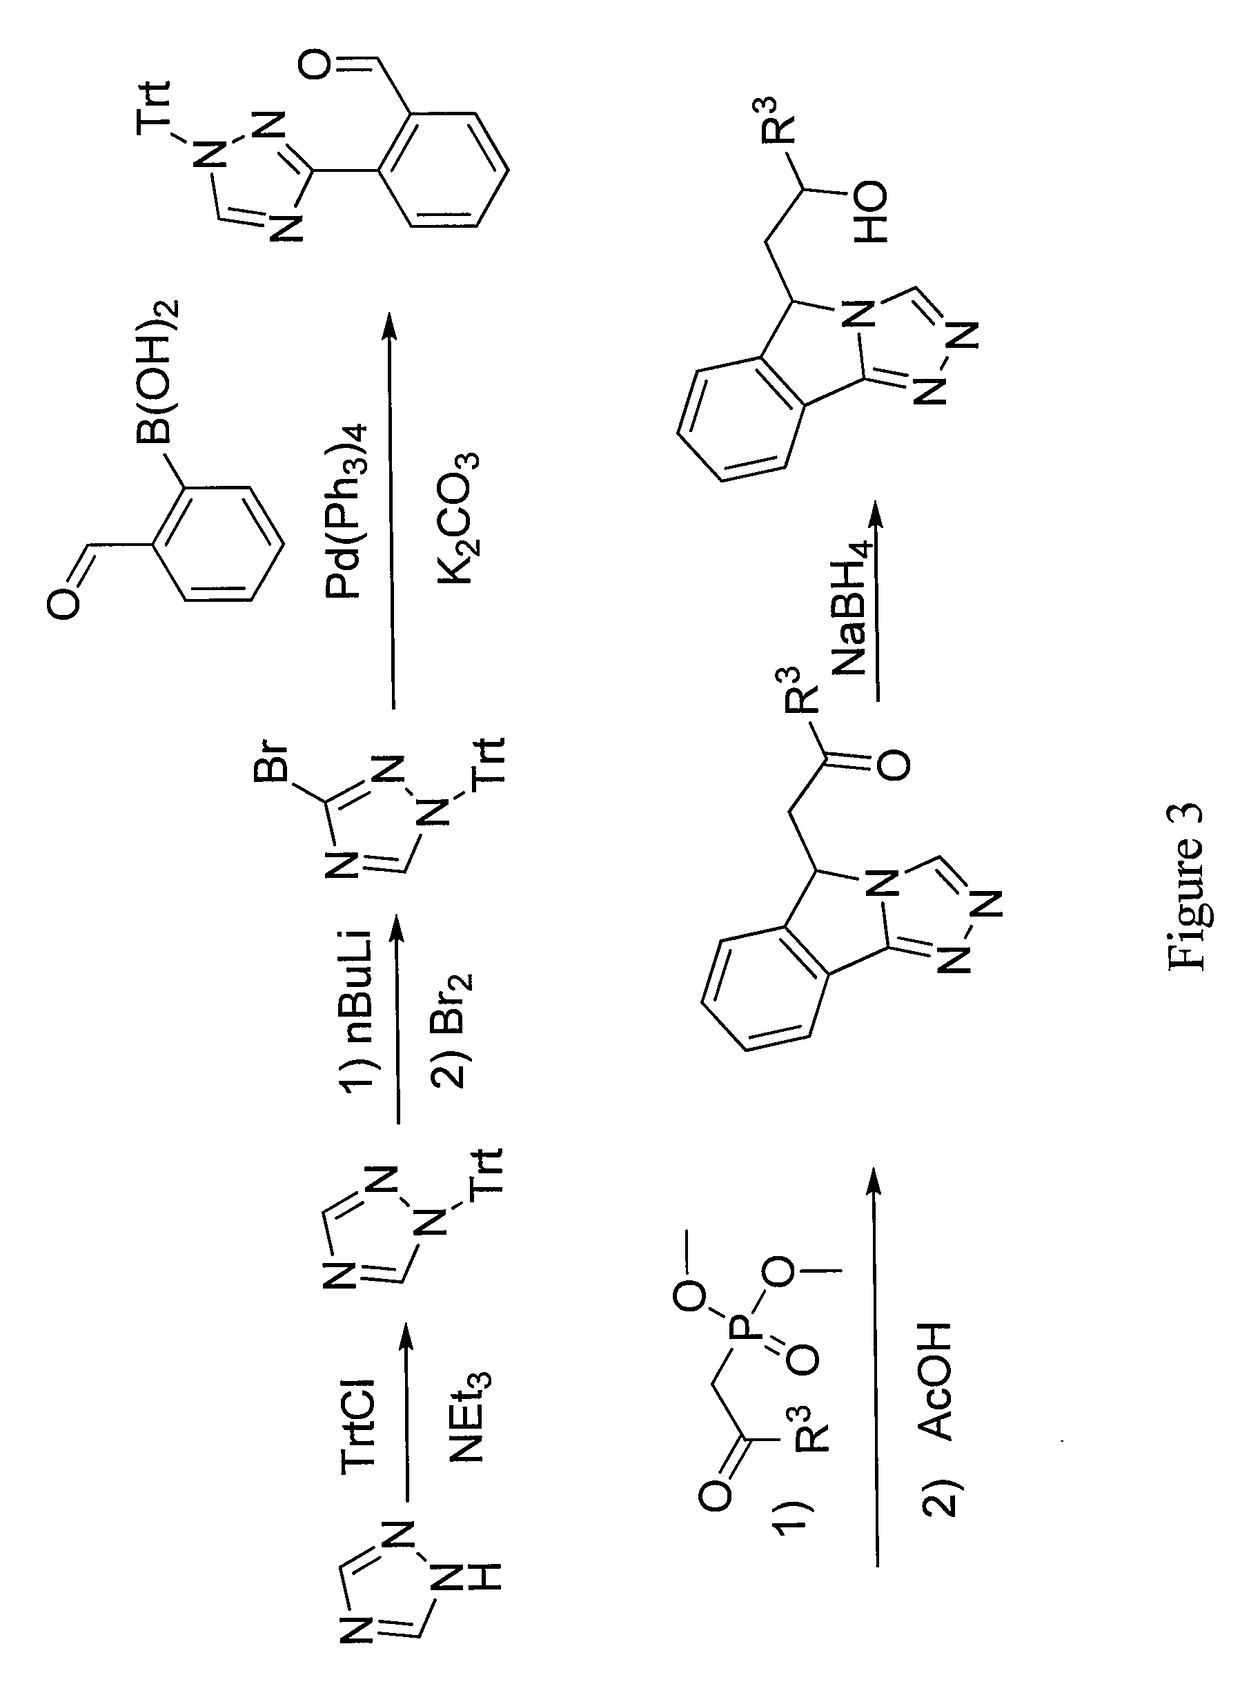 Tricyclic compounds as inhibitors of immunosuppression mediated by tryptophan metabolization